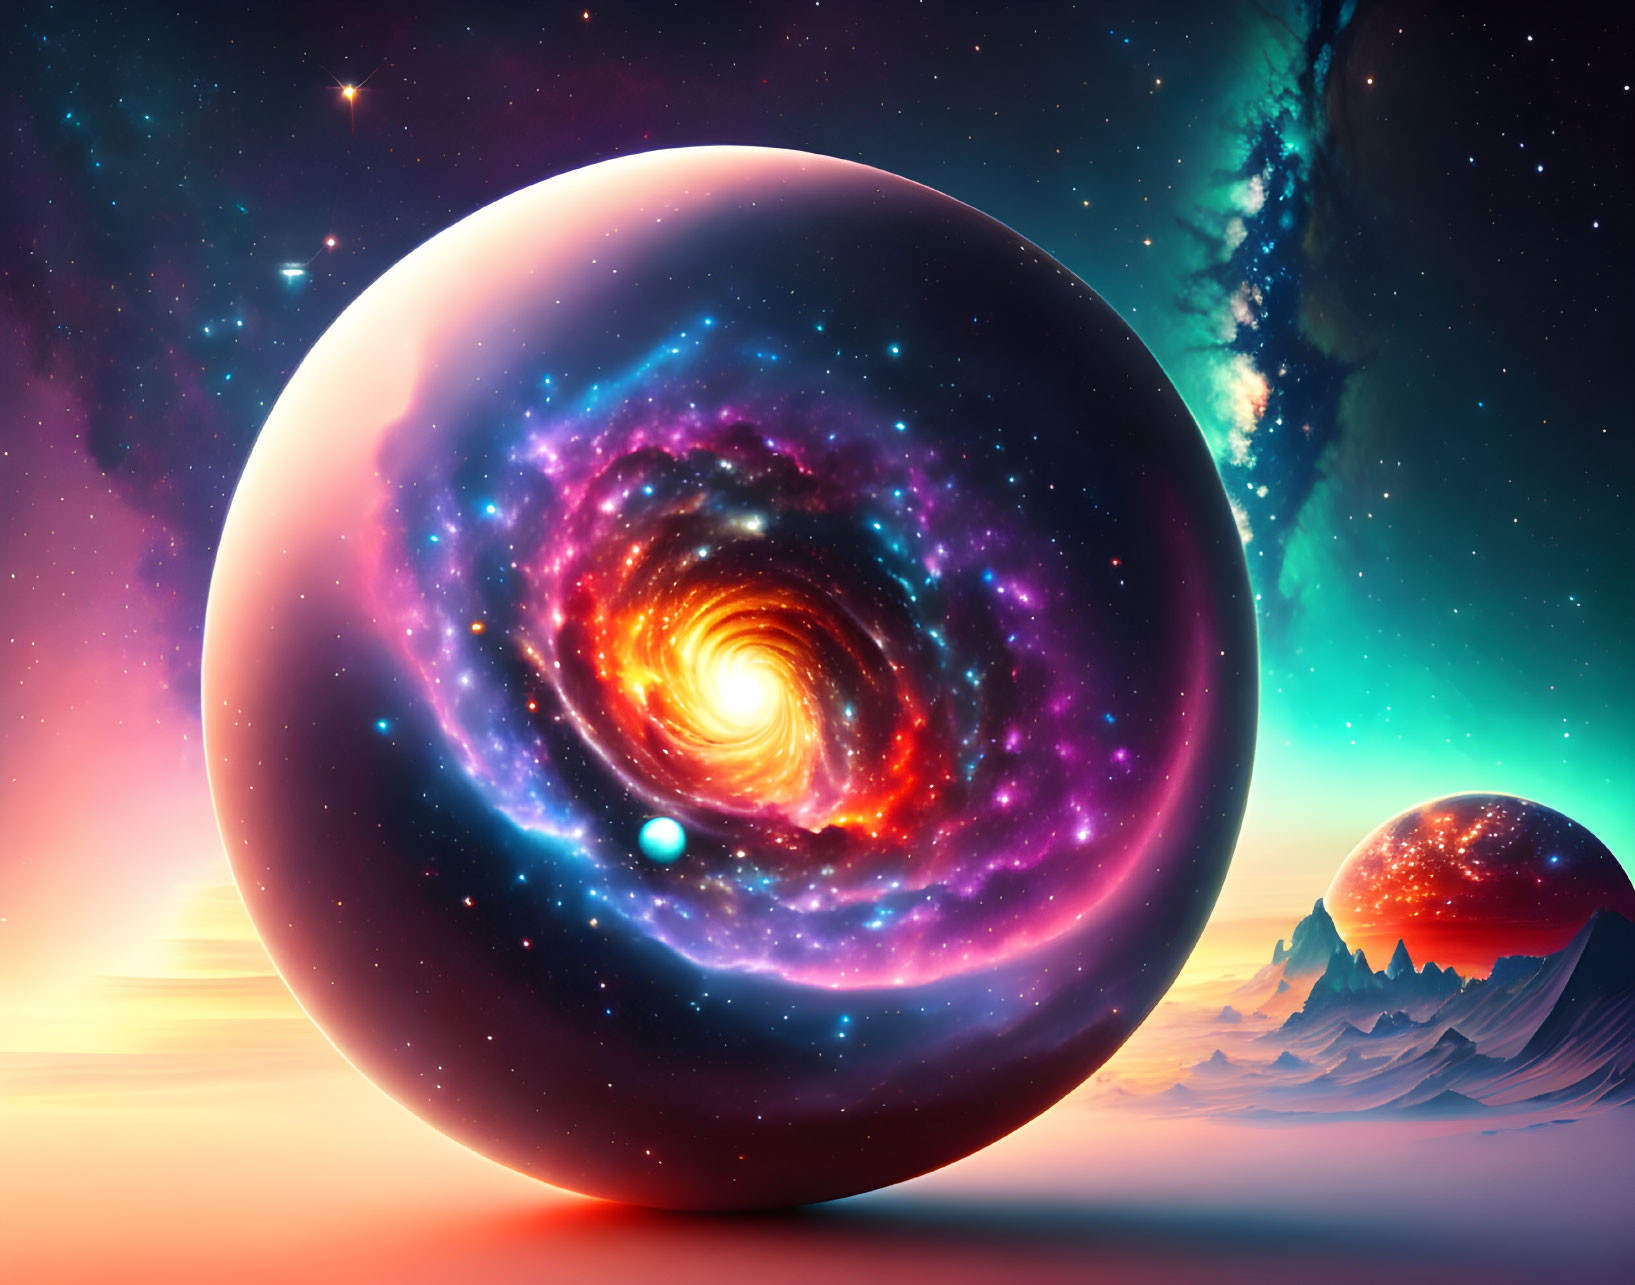 Surreal cosmic digital artwork with swirling galaxy orb and alien landscape.